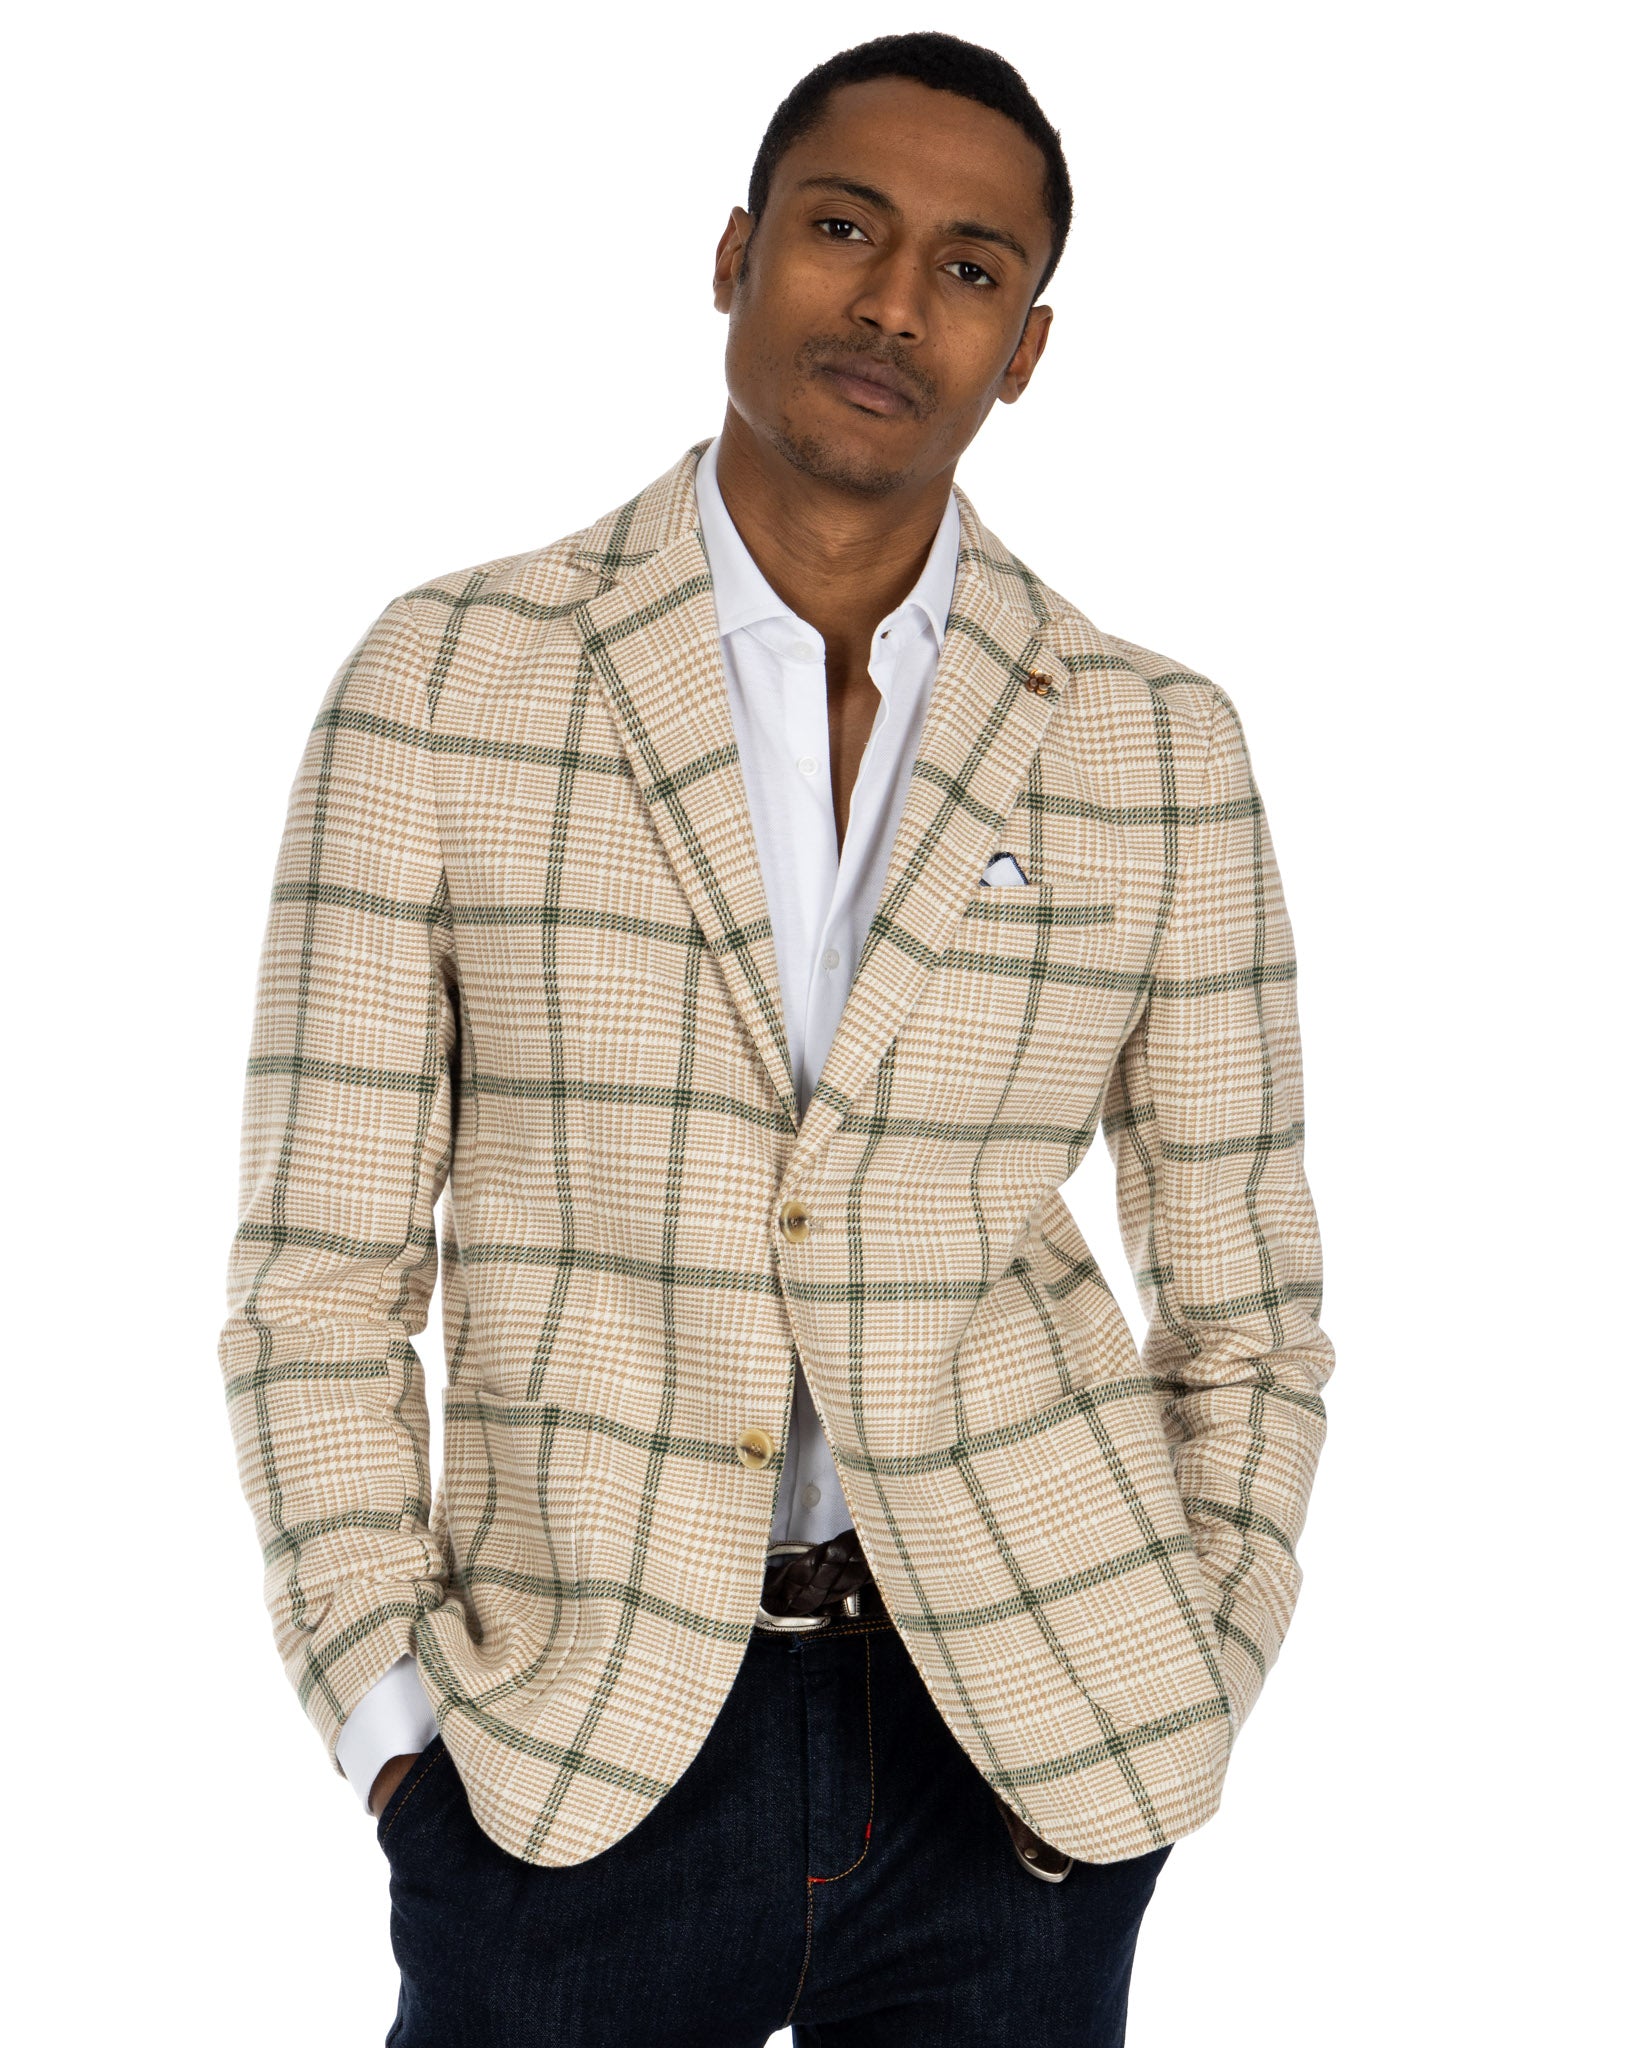 Parma - green and beige checked jacket